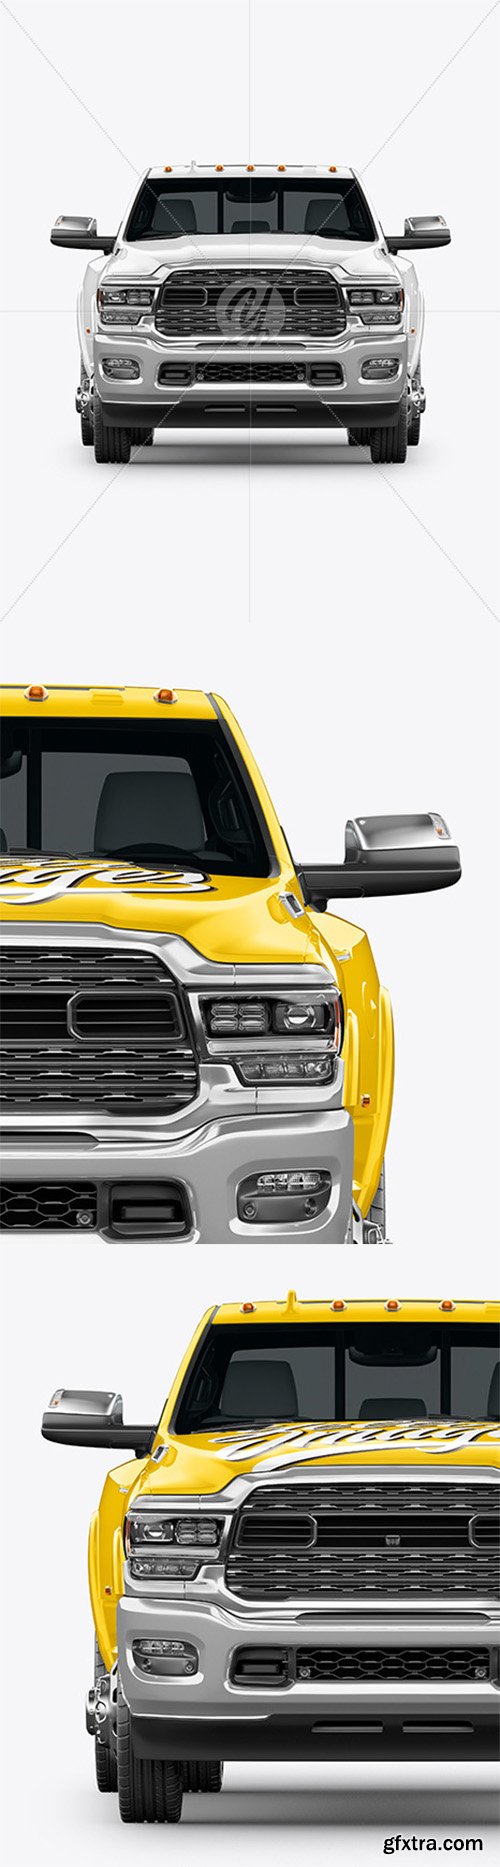 Pickup Truck Mockup - Front View 63896